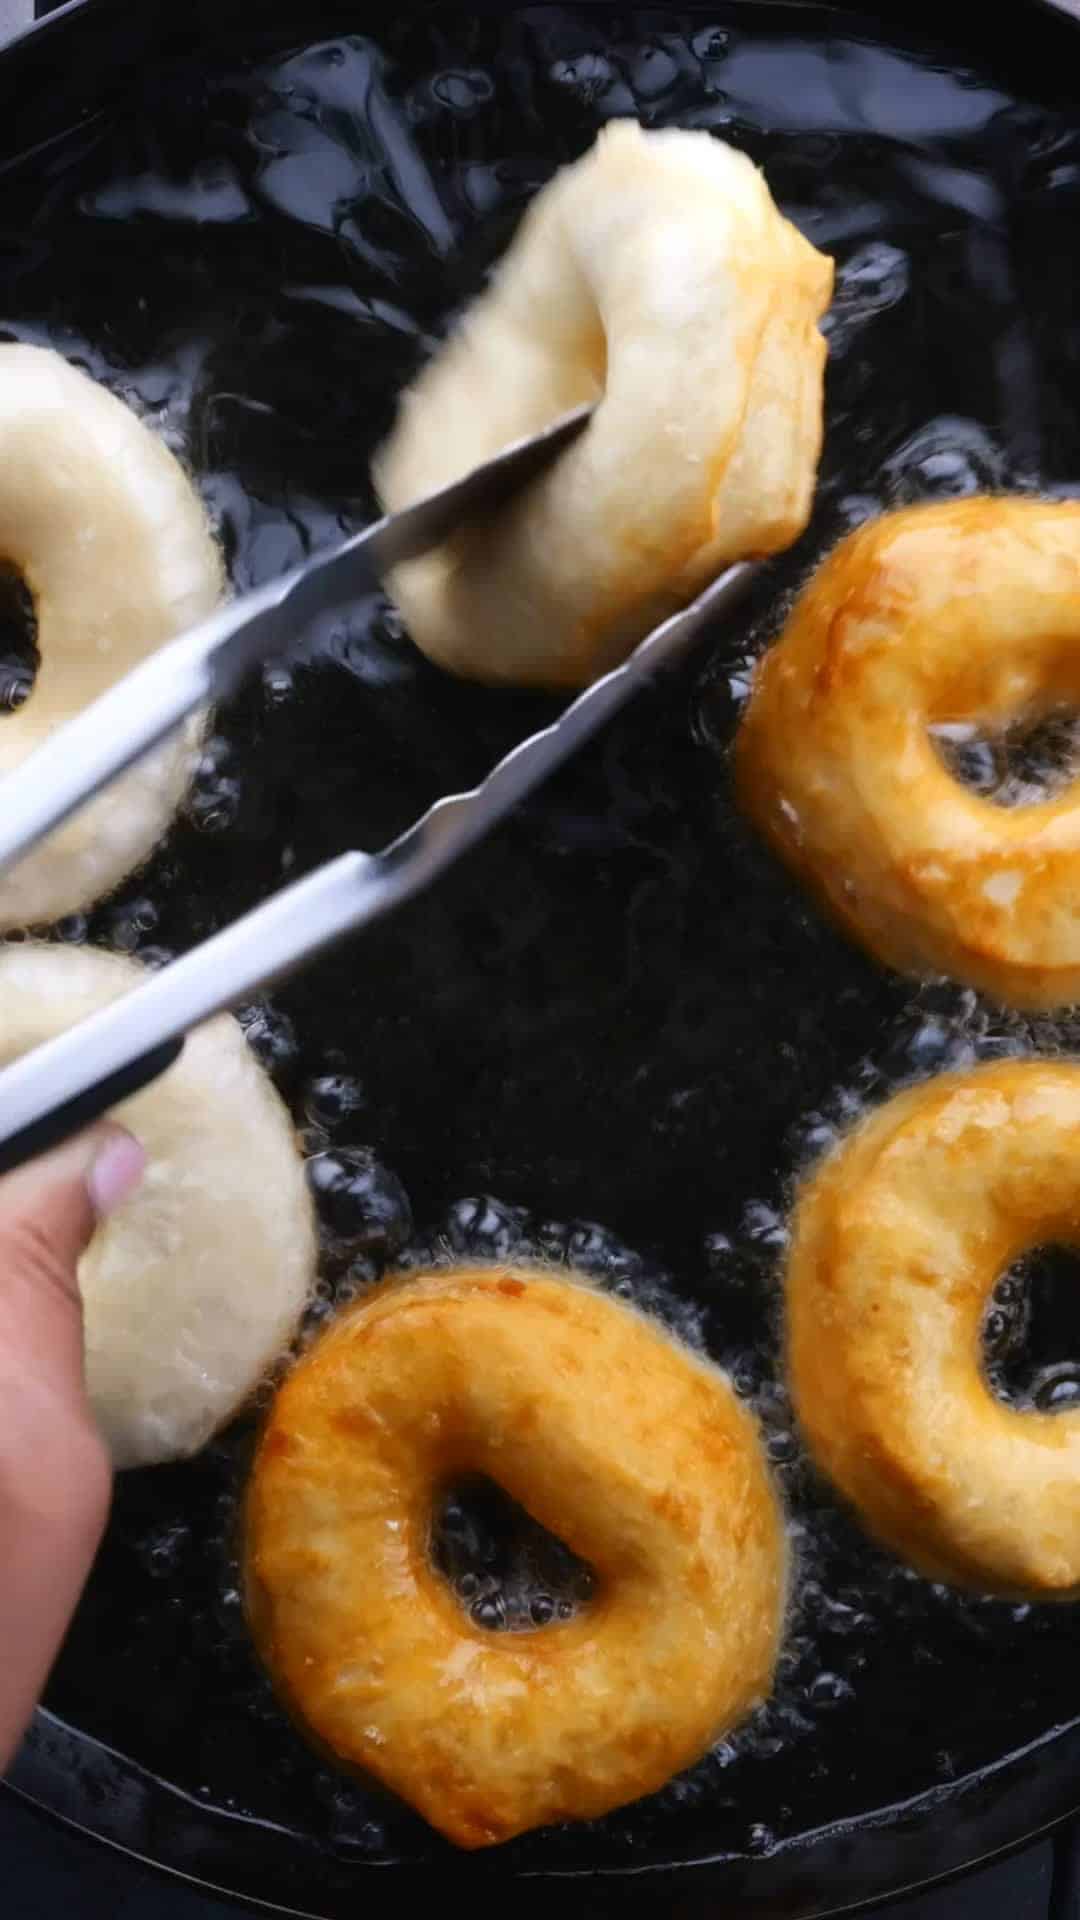 Canned biscuit dough donuts being fried in a black skillet